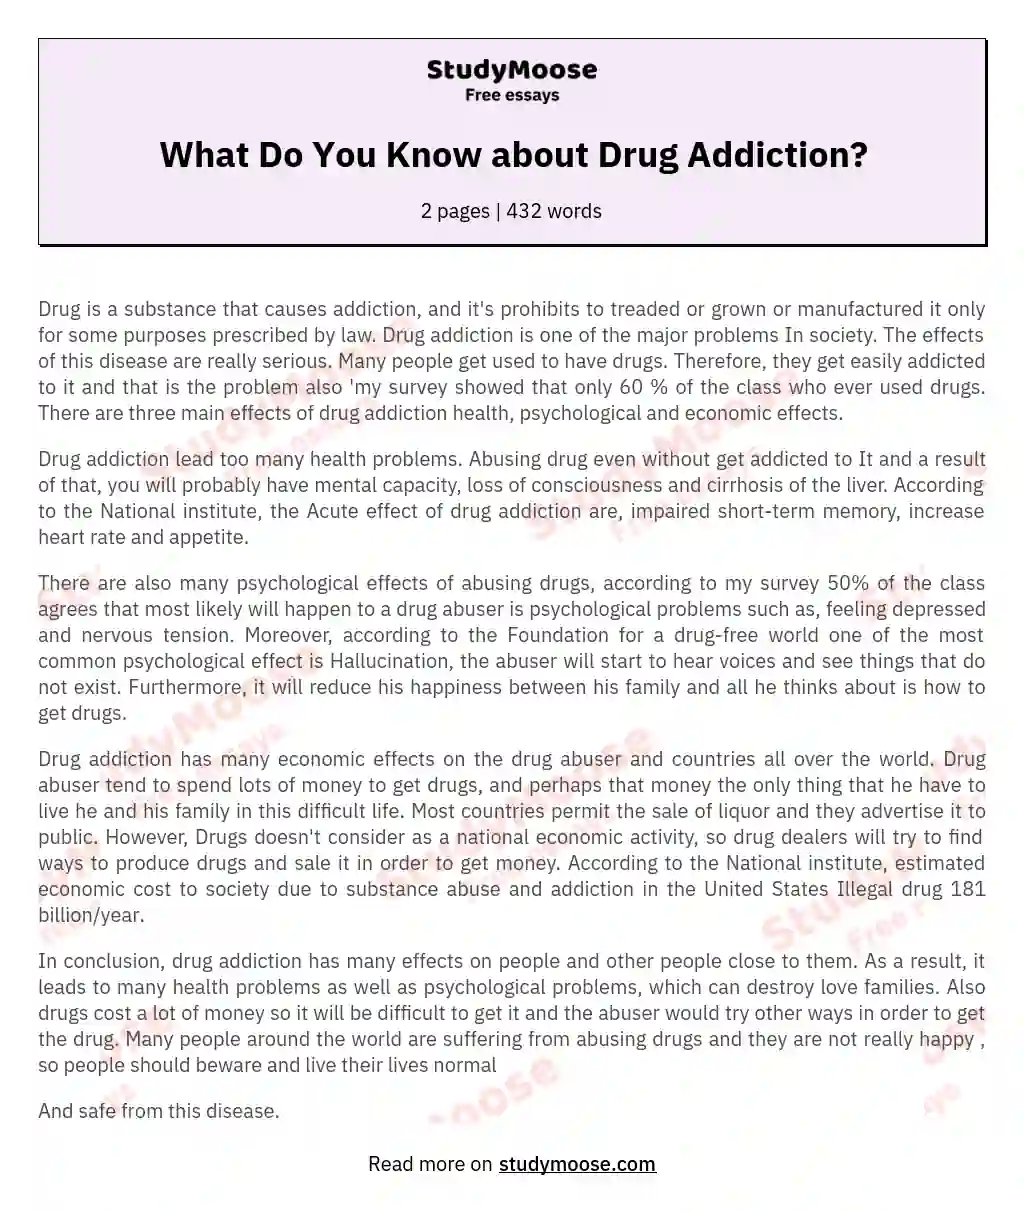 What Do You Know about Drug Addiction? essay